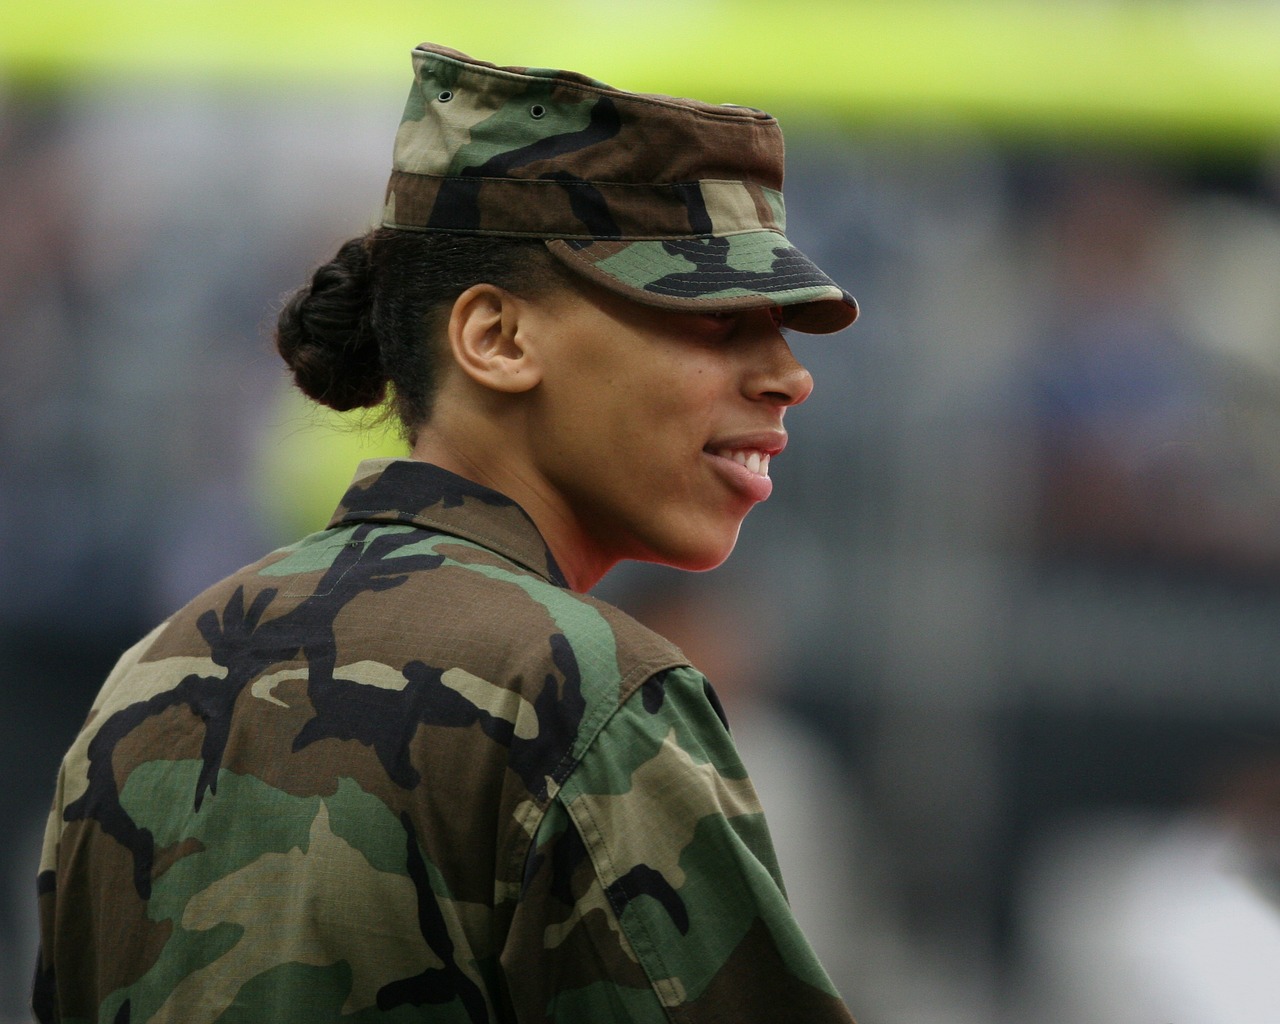 Women in the U.S. military and combat roles: Research roundup